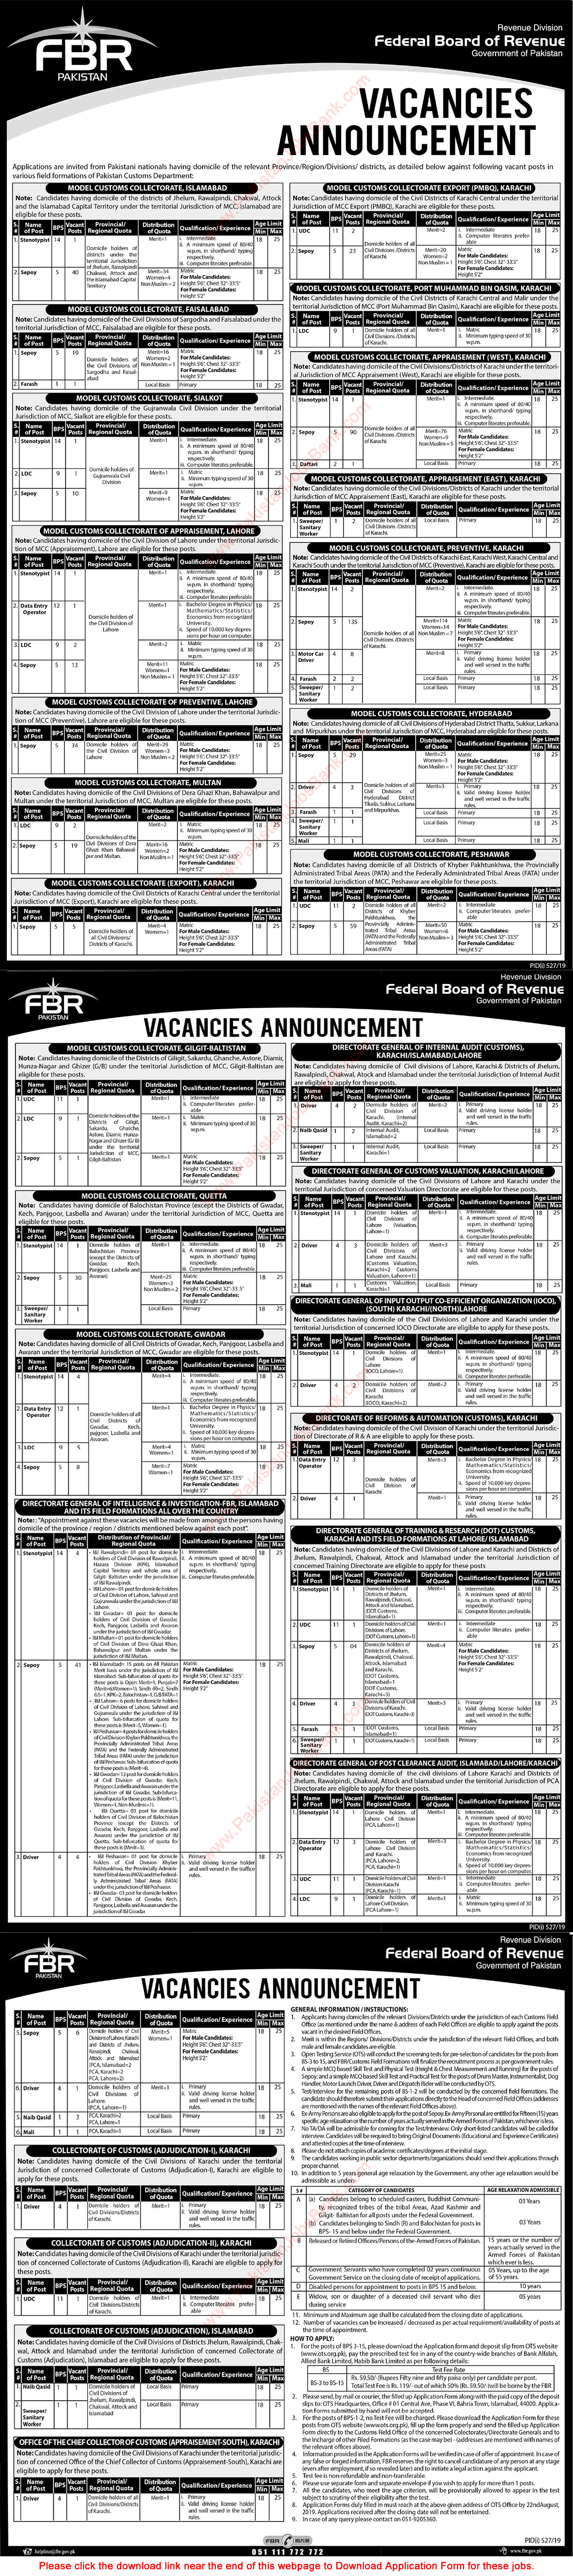 FBR Jobs July 2019 August OTS Application Form Federal Board of Revenue Latest / New